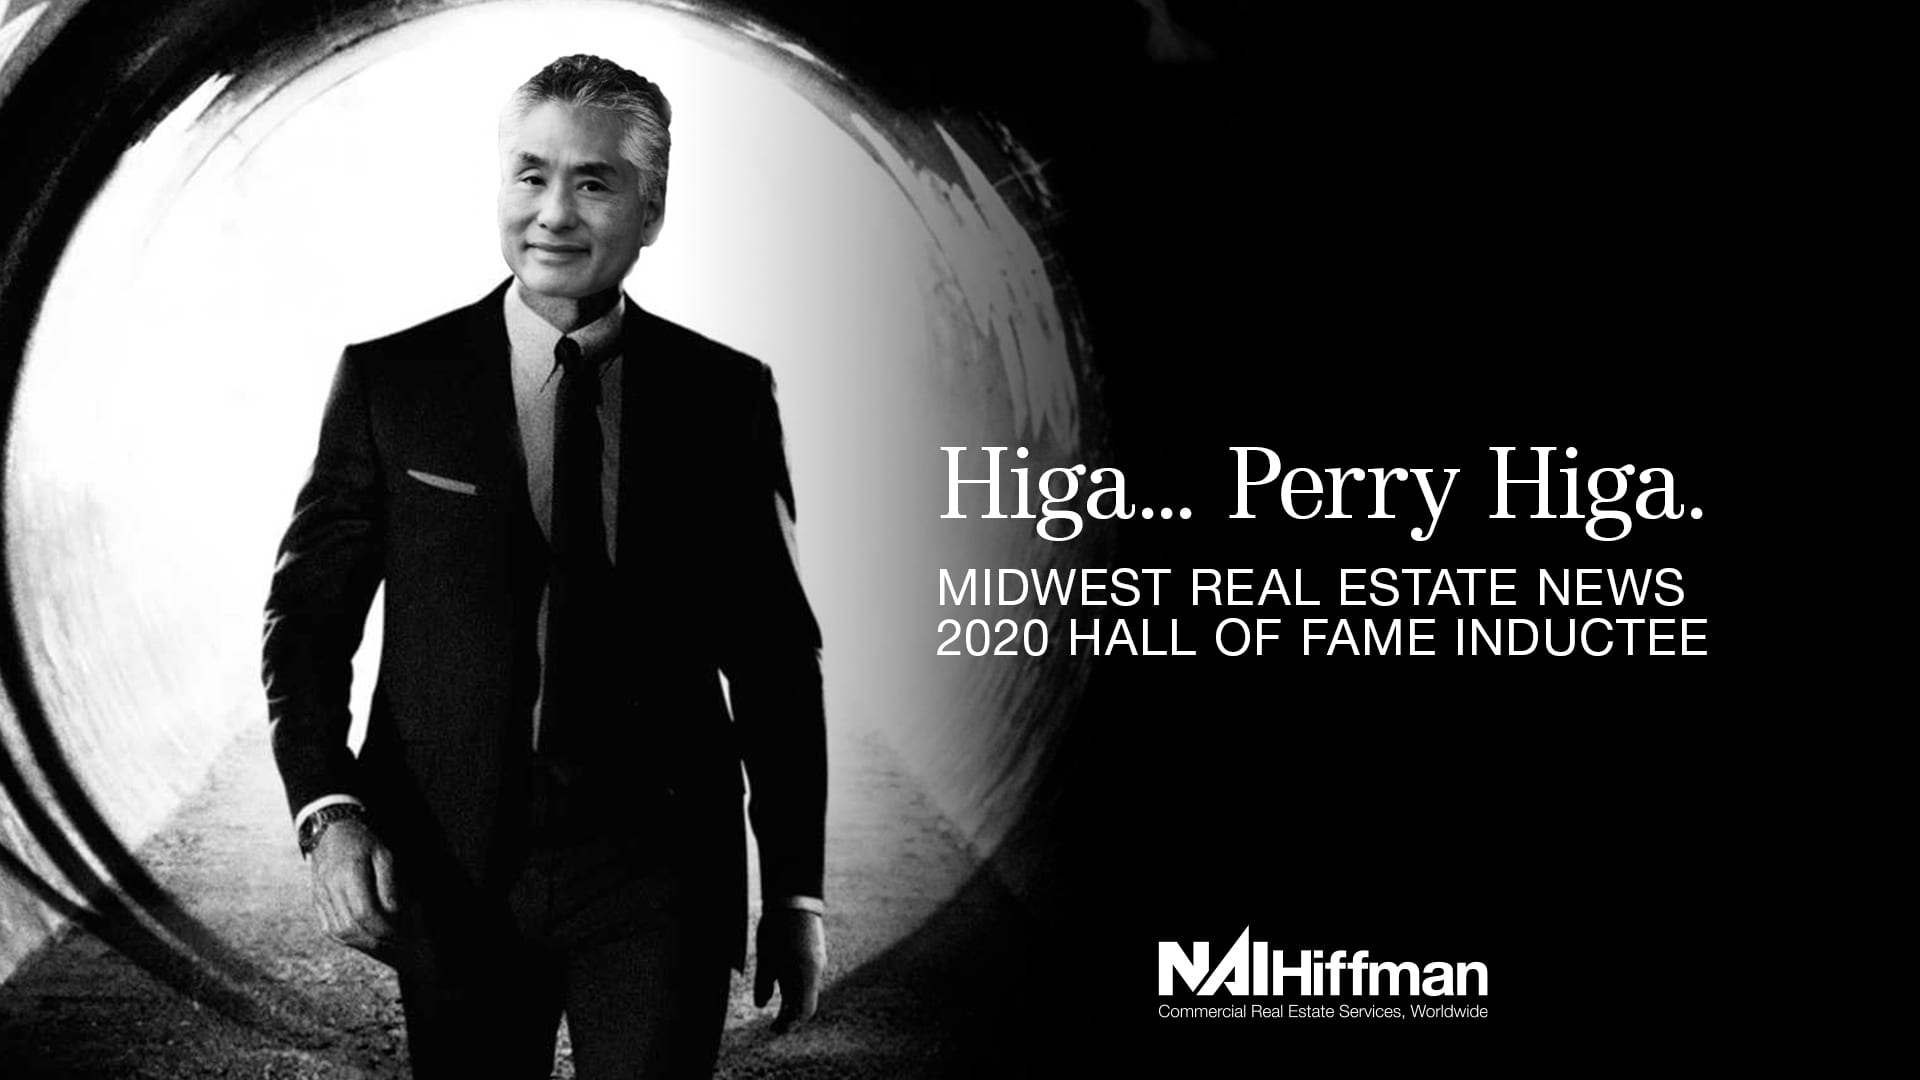 Commercial Real Estate Hall of Fame: NAI Hiffman’s Perry Higa